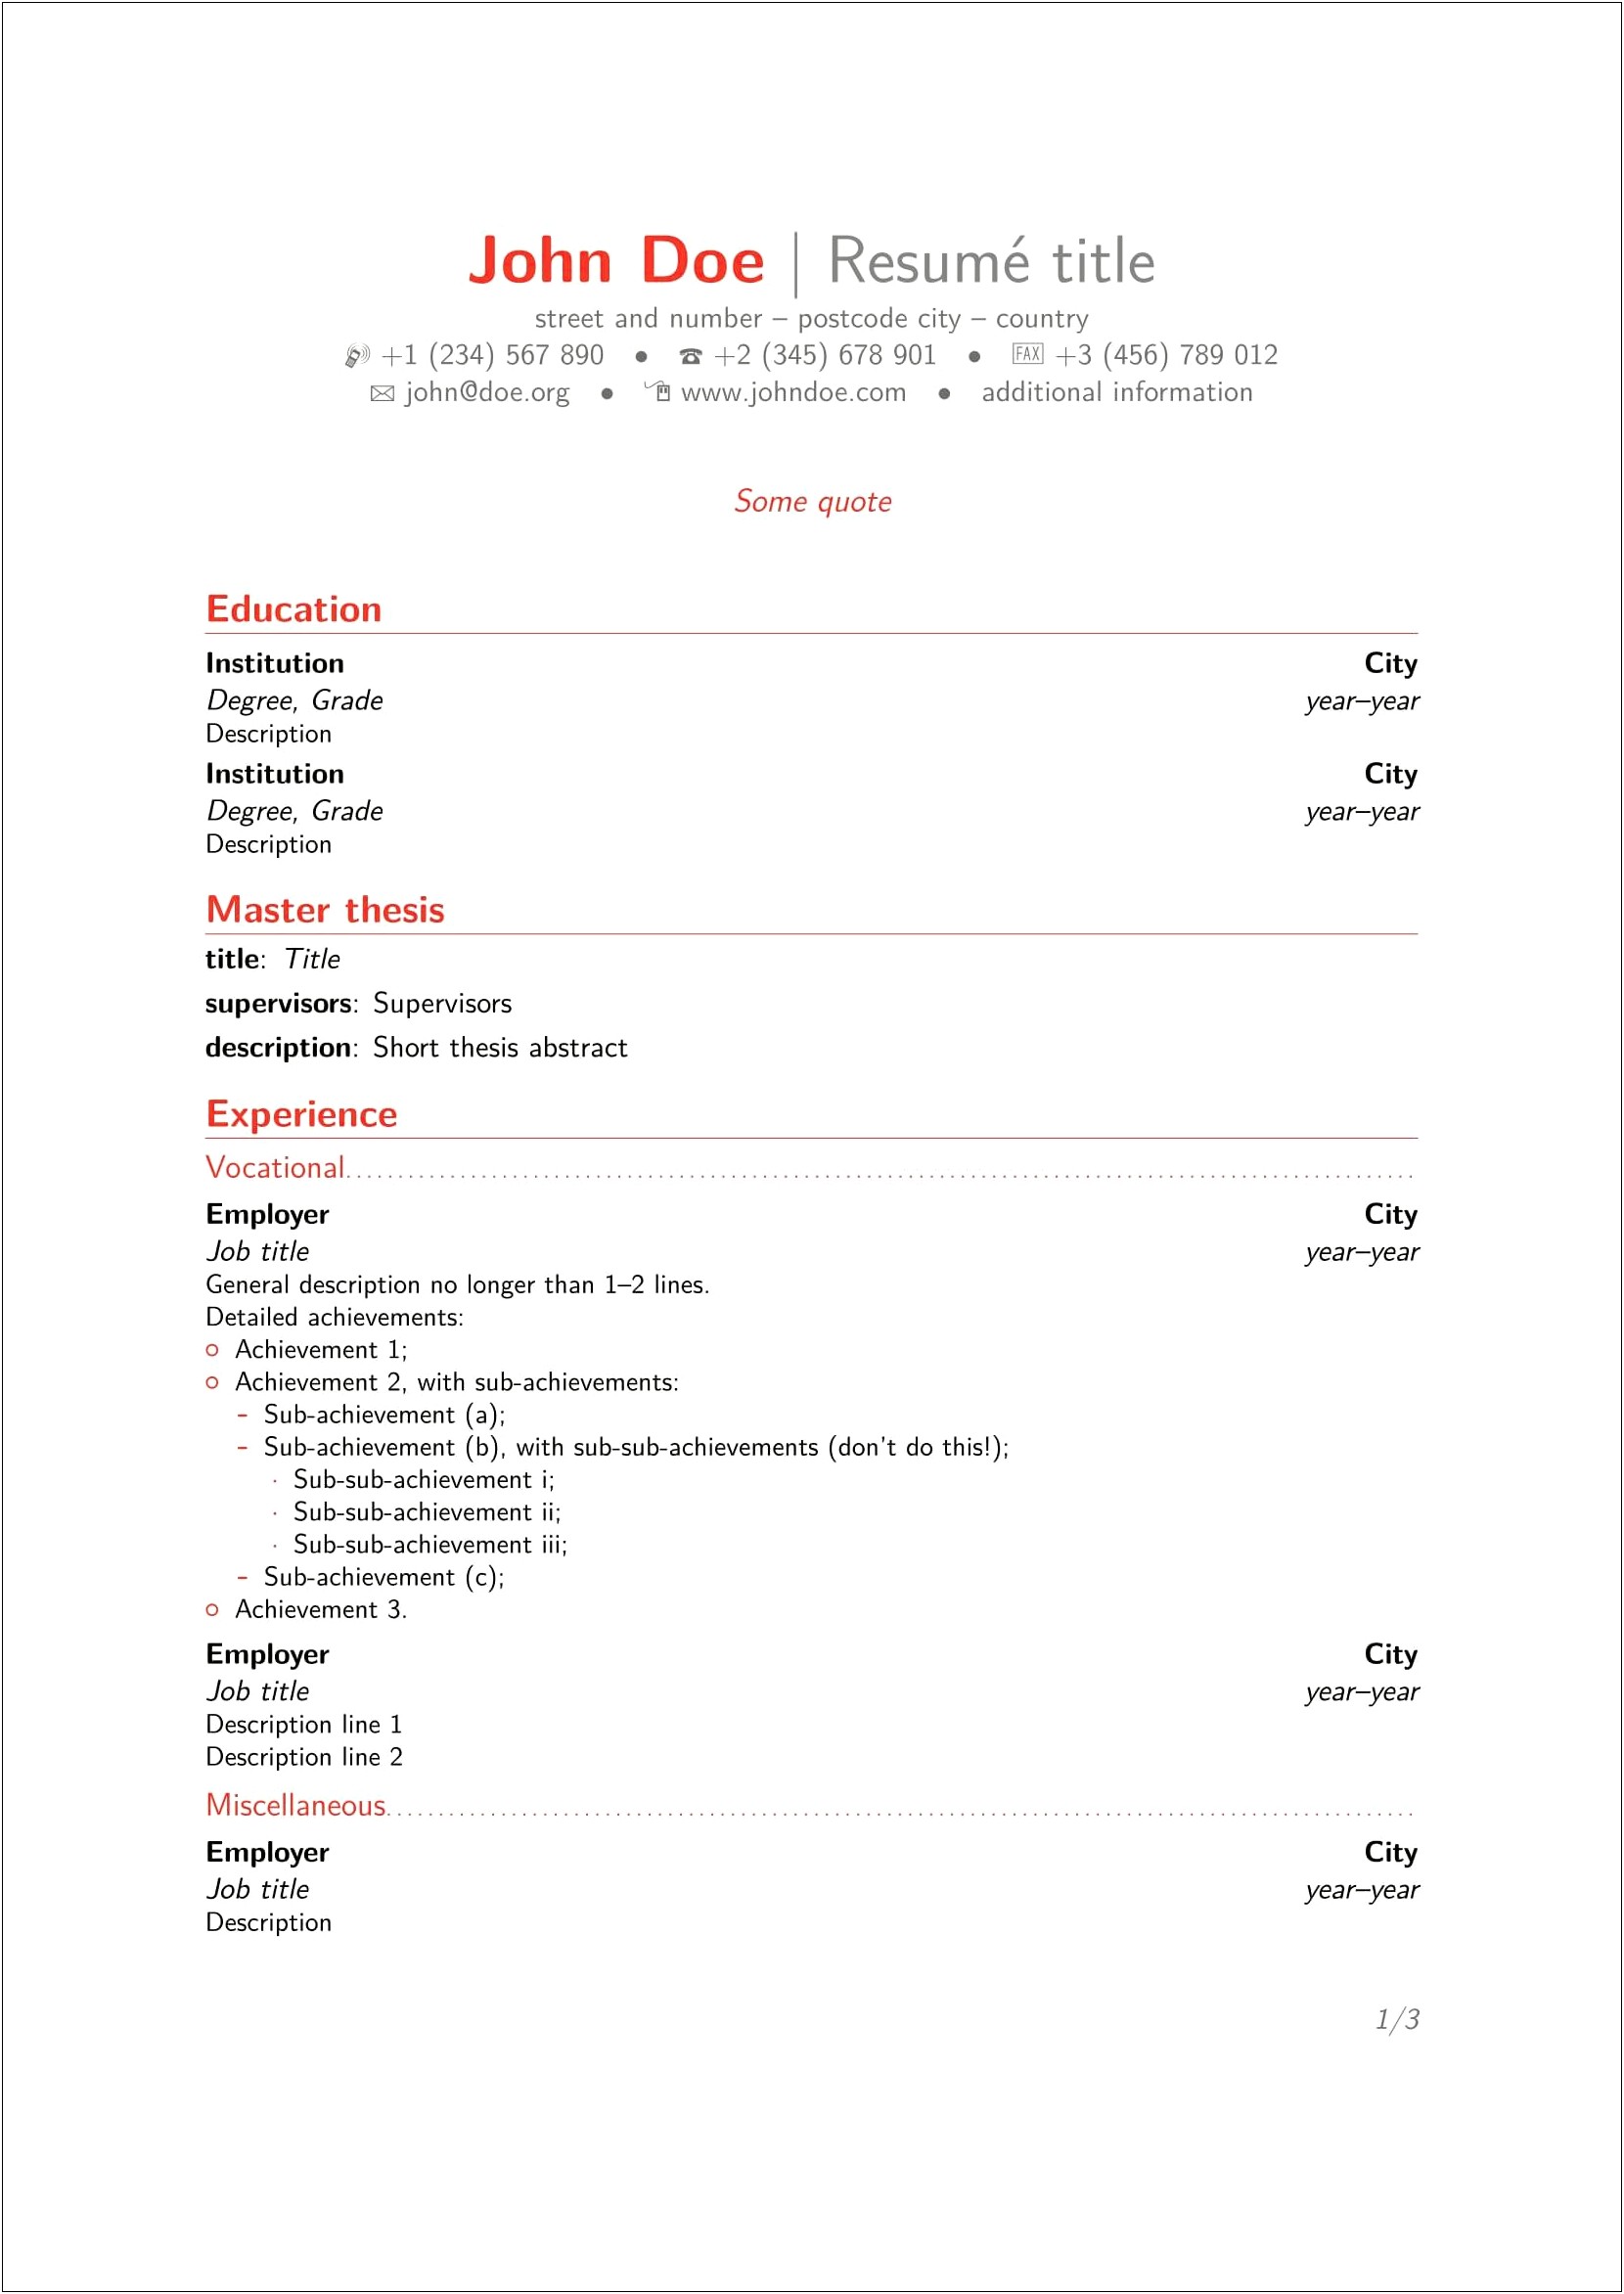 Resume Format For Job In Bank